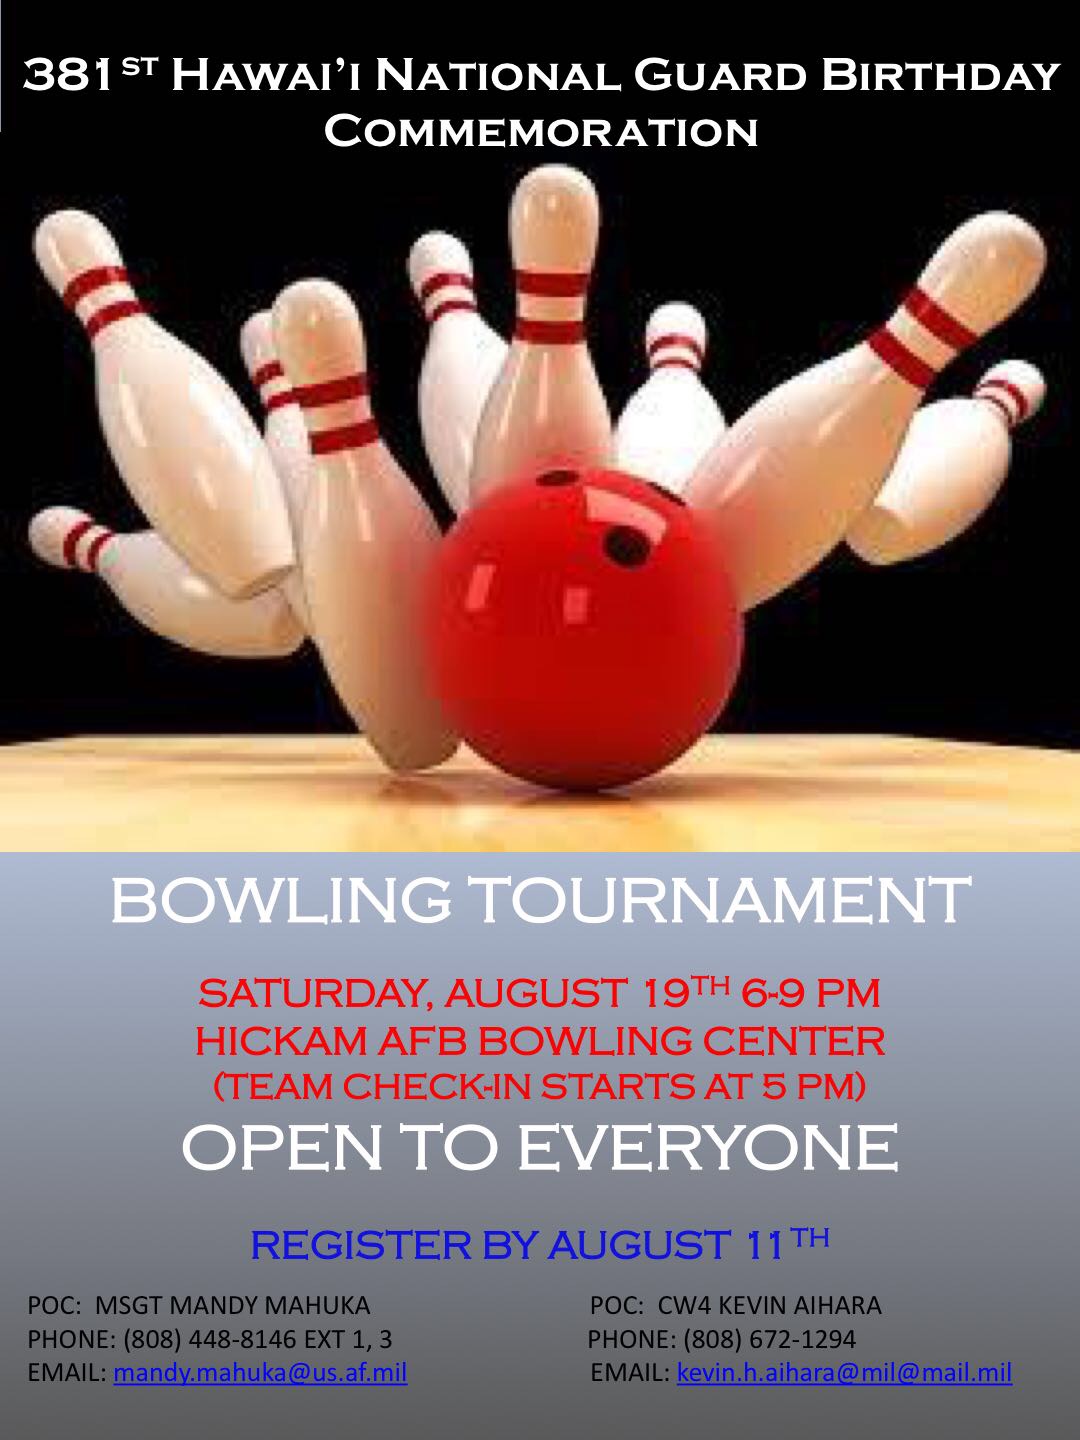 HNG Birthday Commemoration Bowling Tournment Fundraiser | Retiree News1080 x 1440